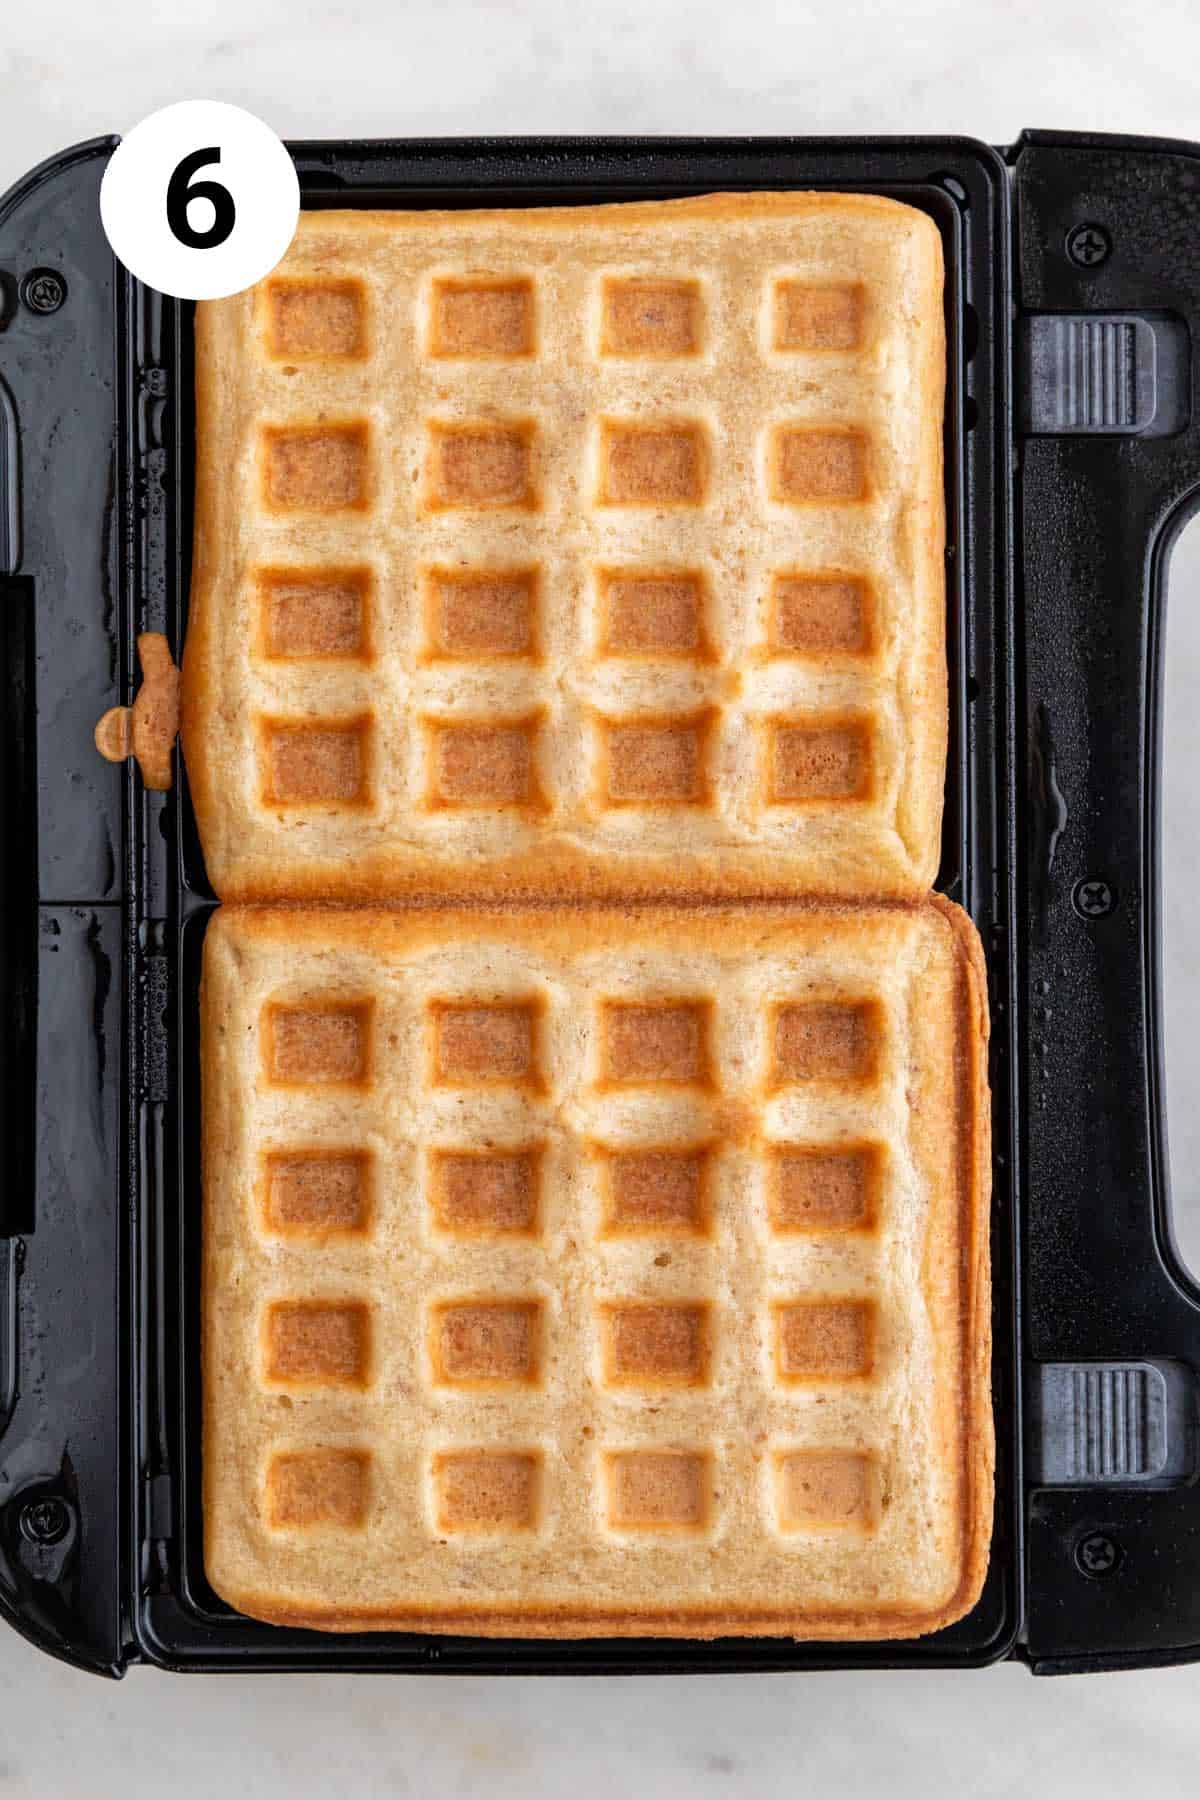 Cooked vegan waffles in a waffle maker.